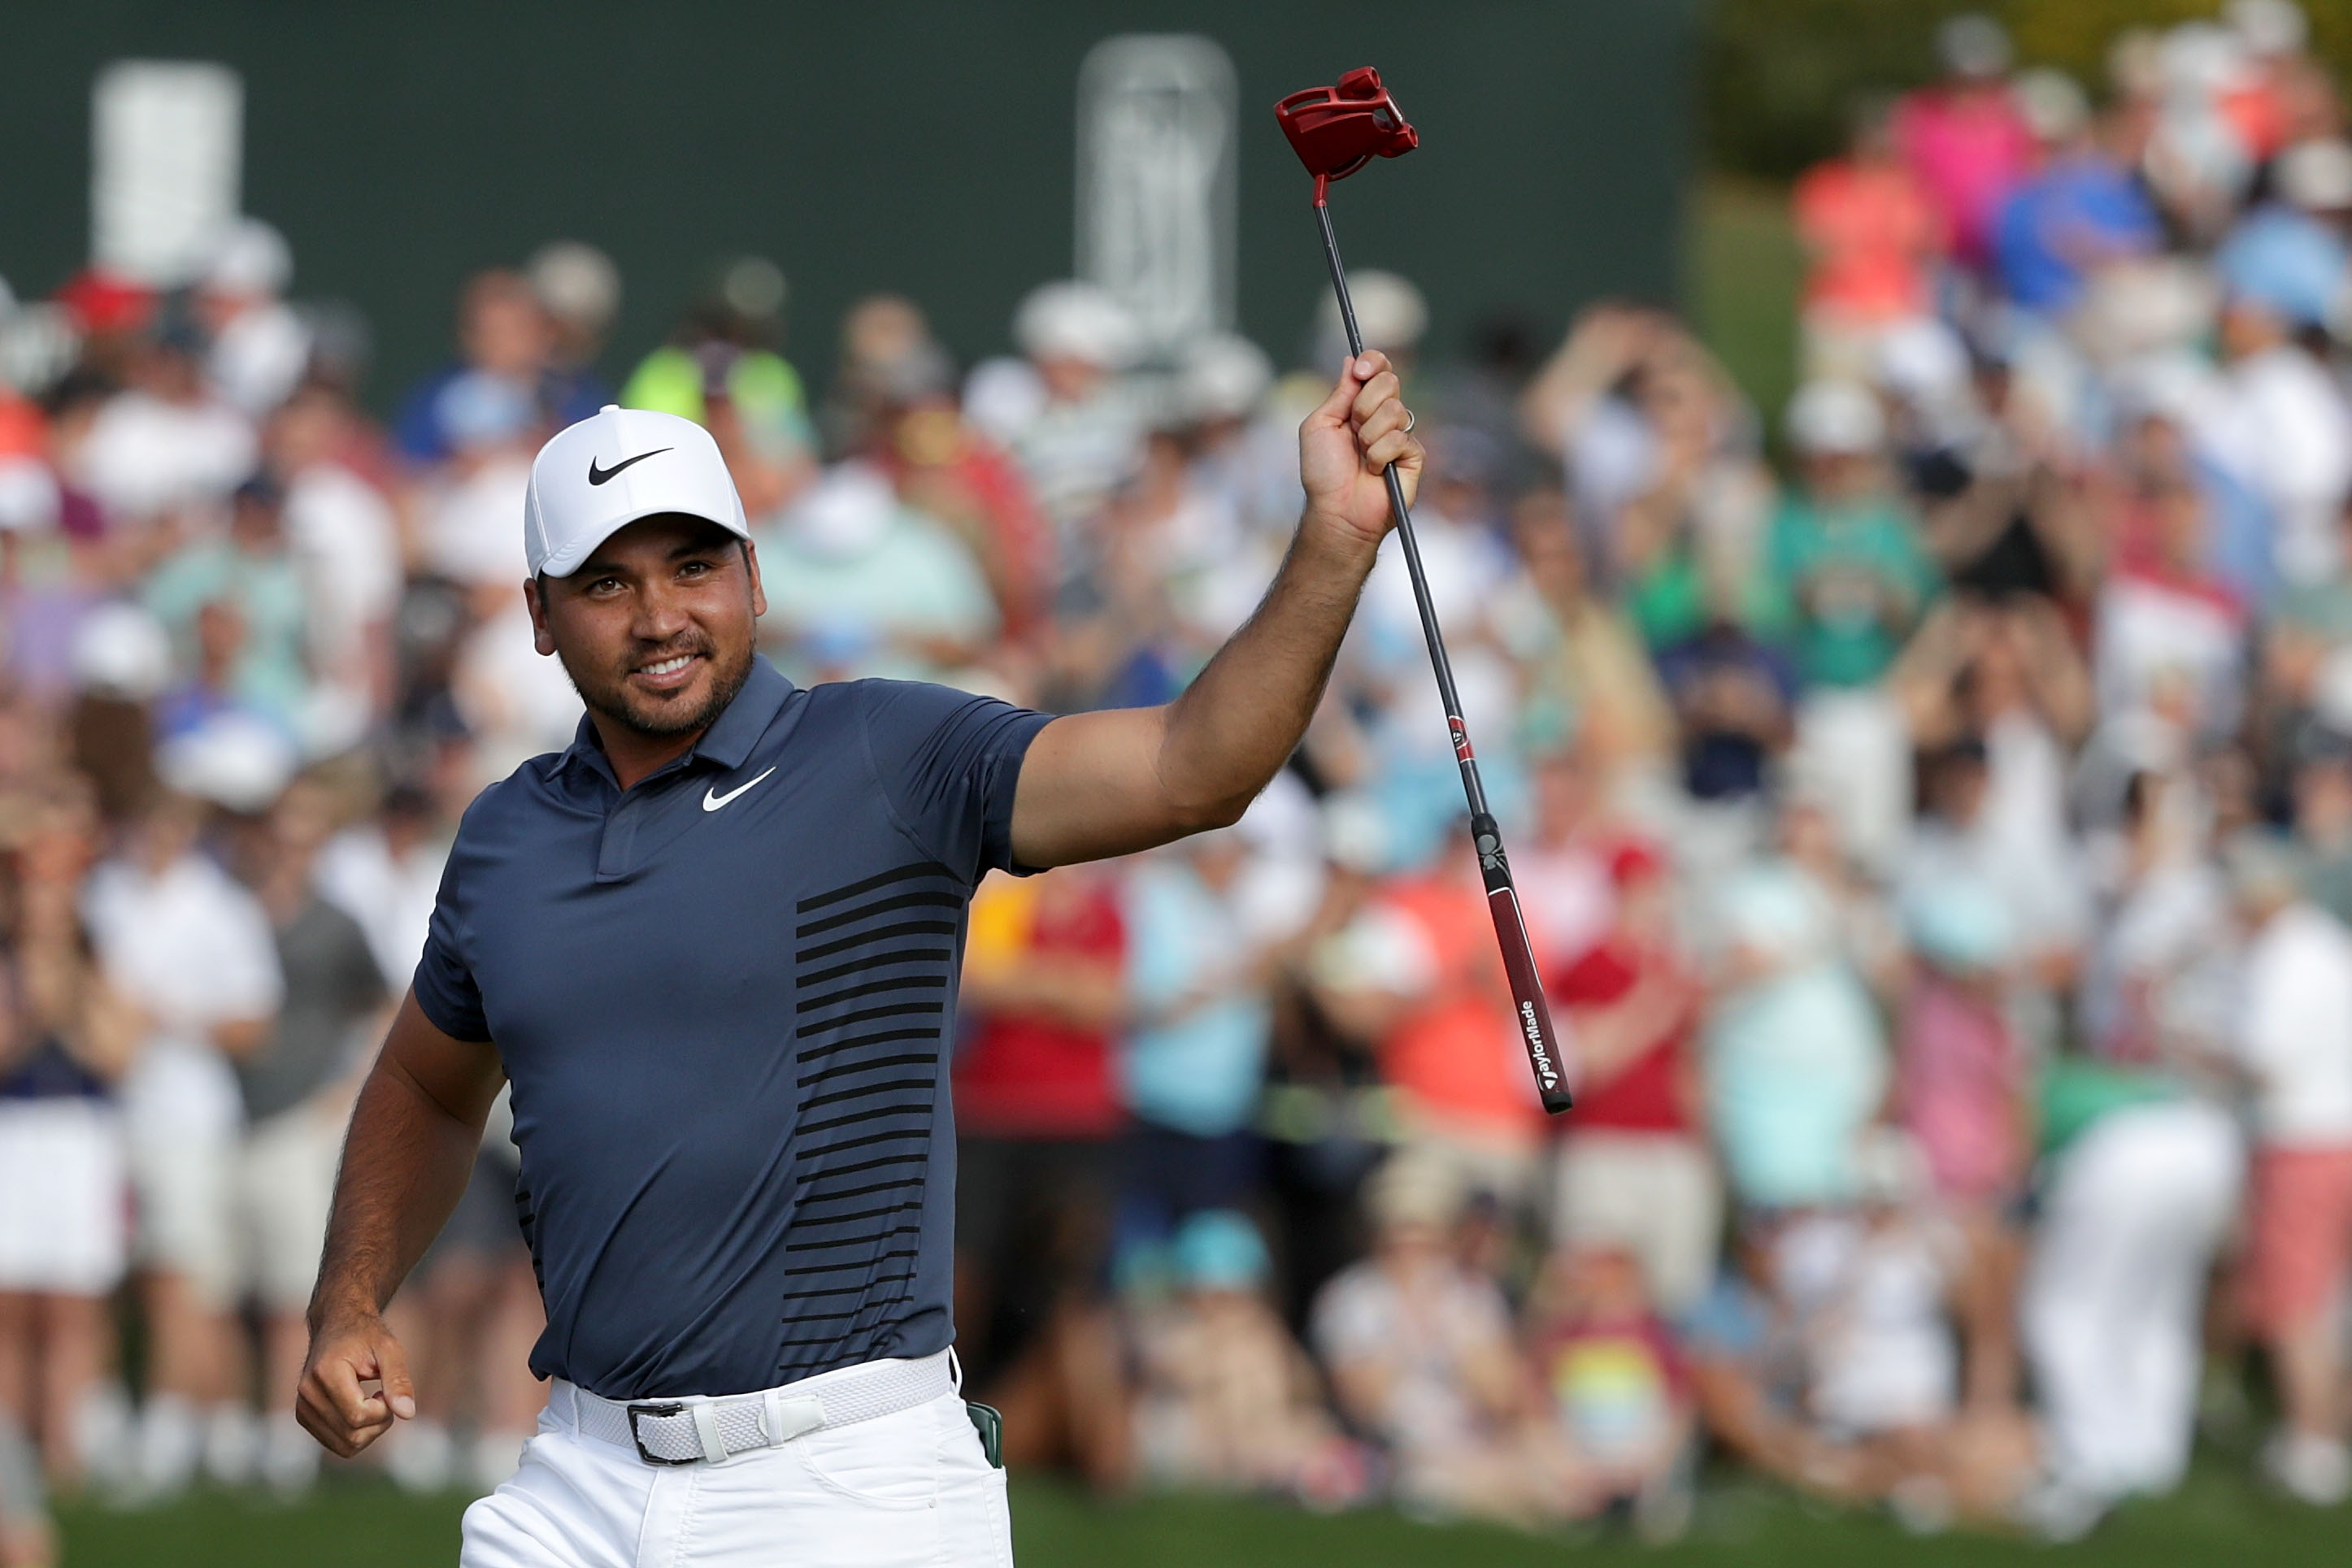 The clubs Jason Day used to win the Wells Fargo Championship